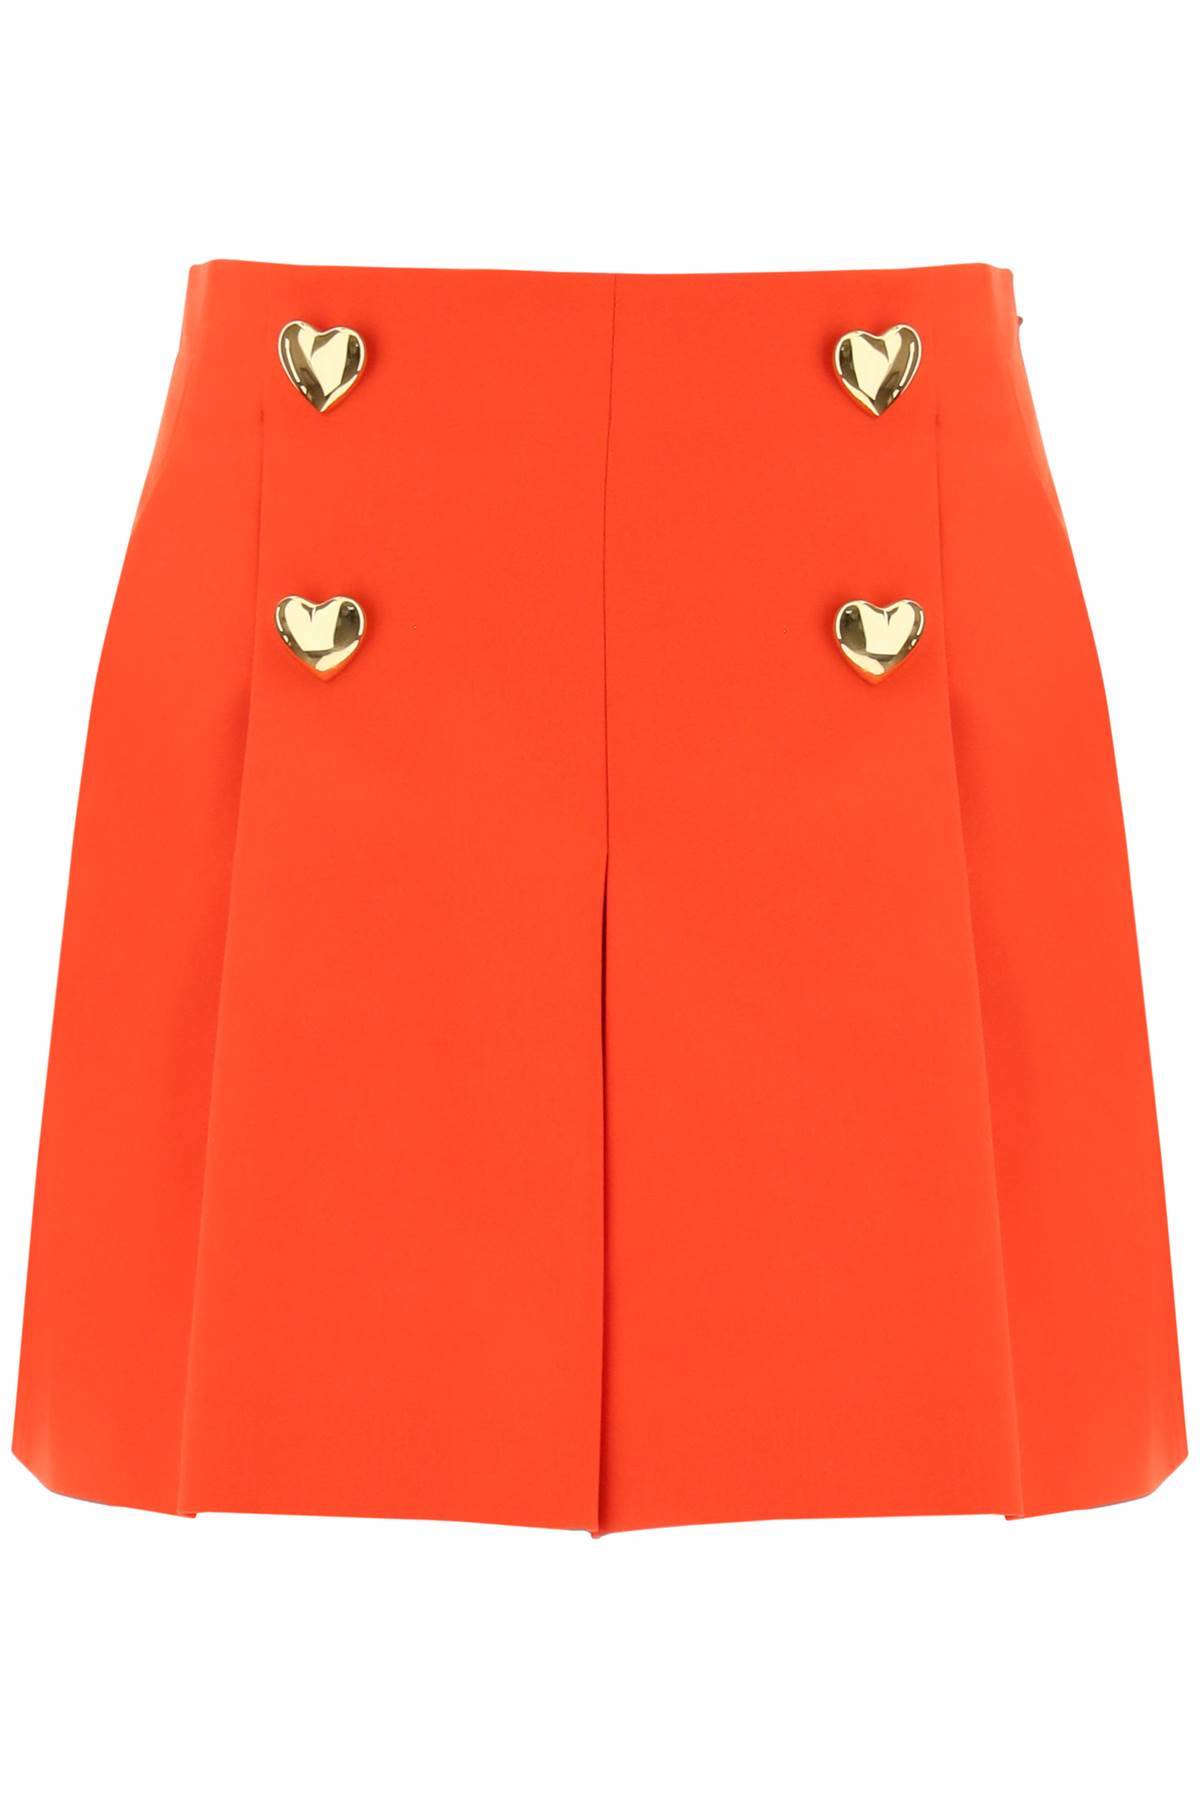 Moschino MOSCHINO shorts with heartshaped buttons